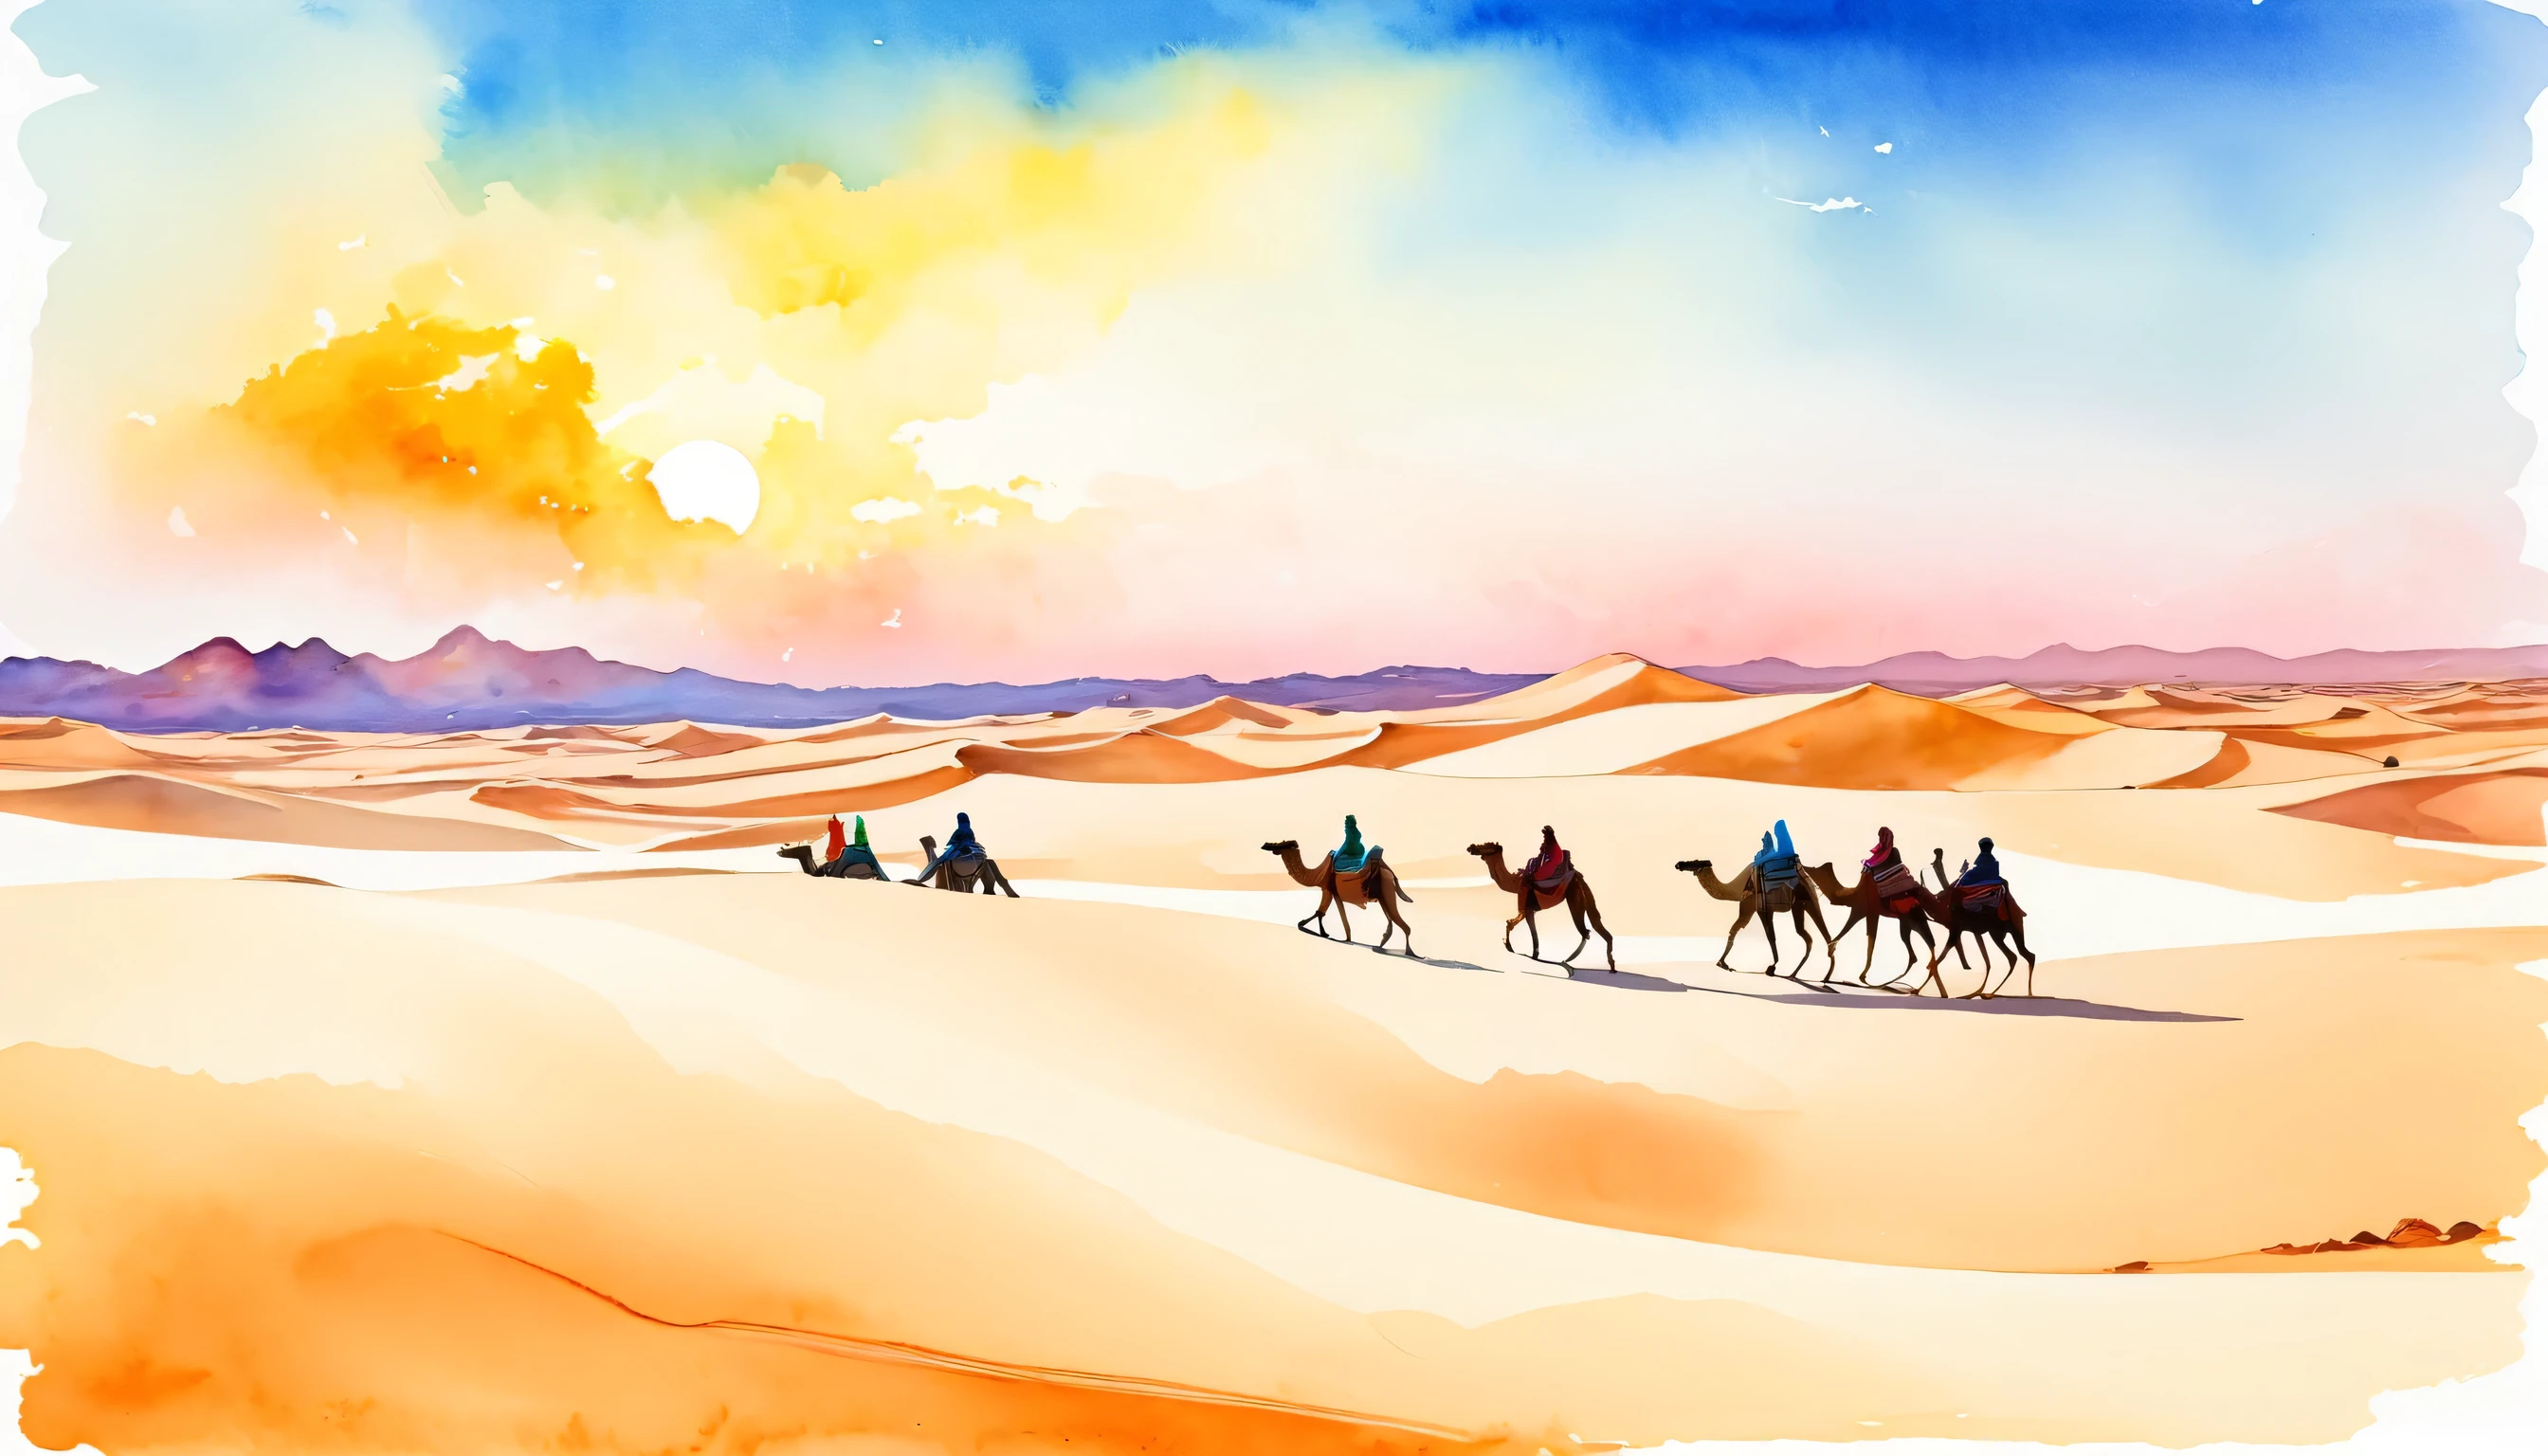 a group of people riding camels in the desert with the Sahara in the background, the landscape features sand dunes and an arid environment, desert, riding, sand, outdoors, sky, sunset, modern art, painting, drawing, watercolor, psychedelic colors